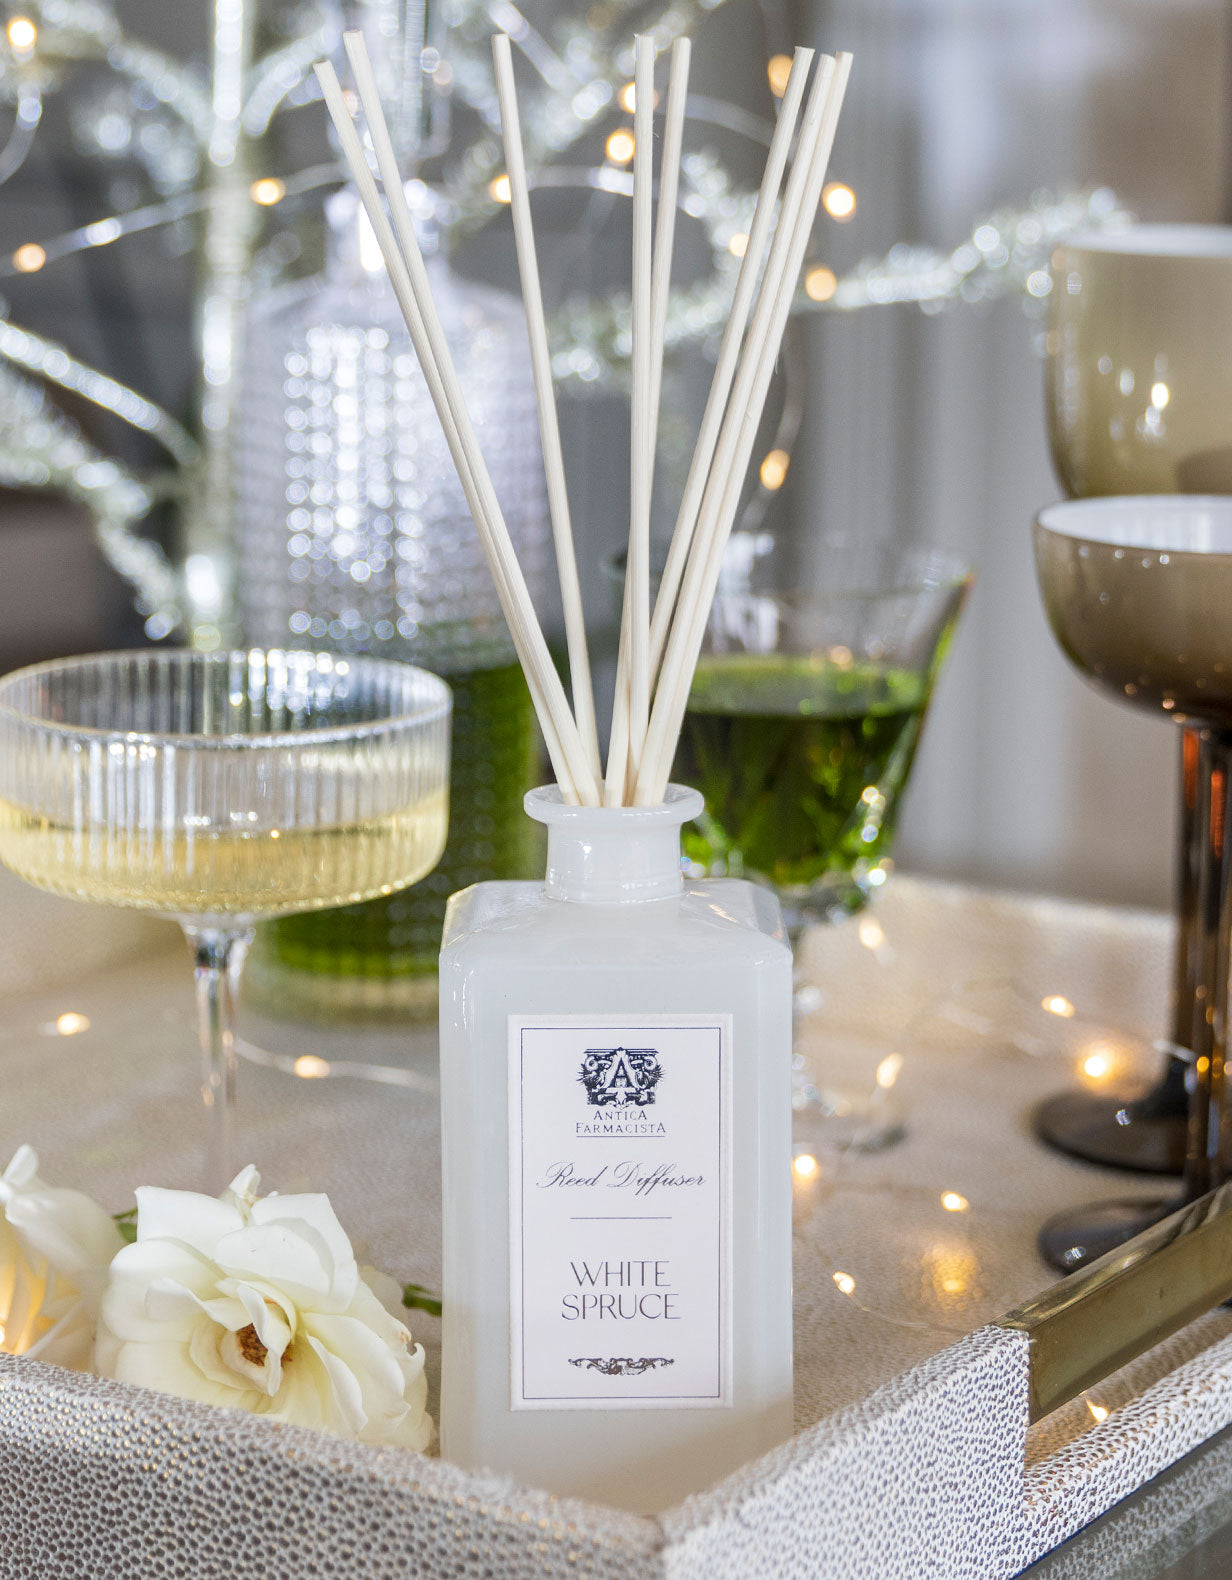 320ml White Spruce Reed Diffuser